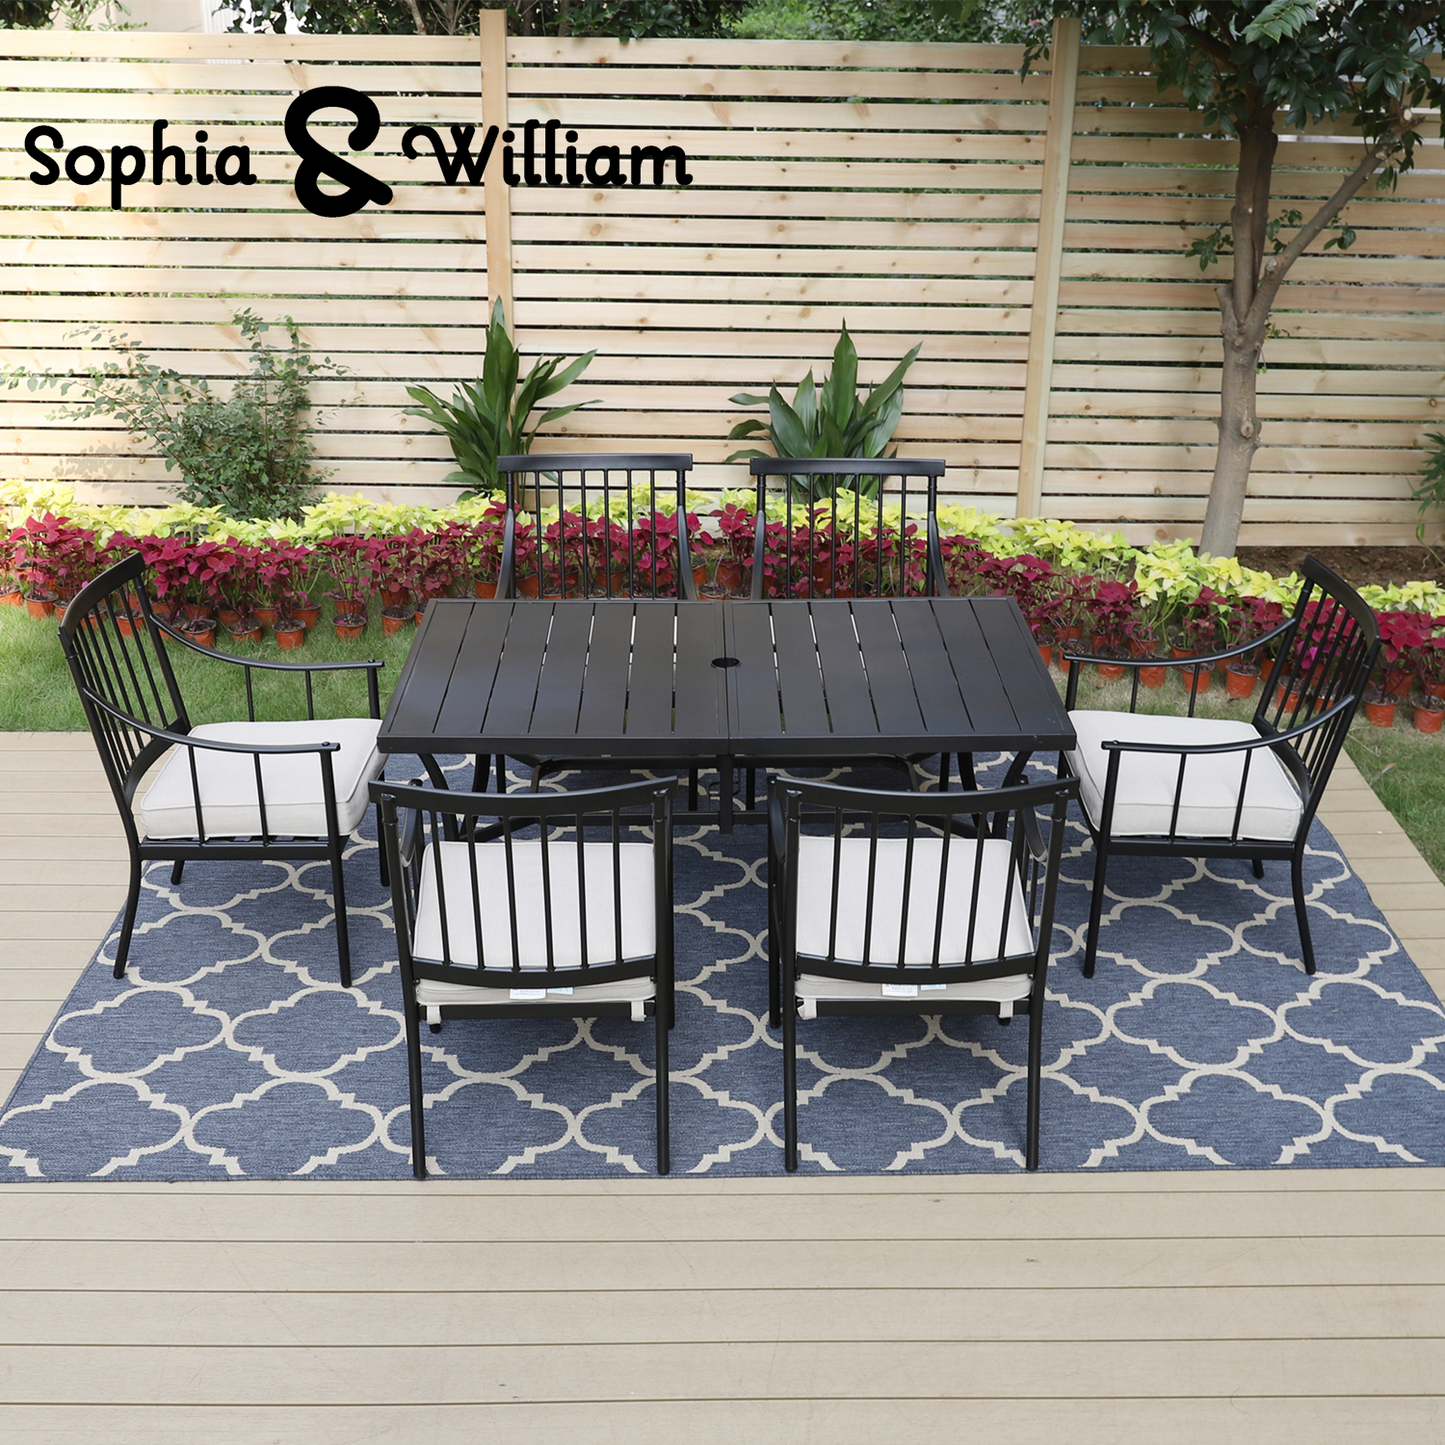 Sophia&William 7-Piece Outdoor Patio Dining Set Metal Padded Chairs and Table Set